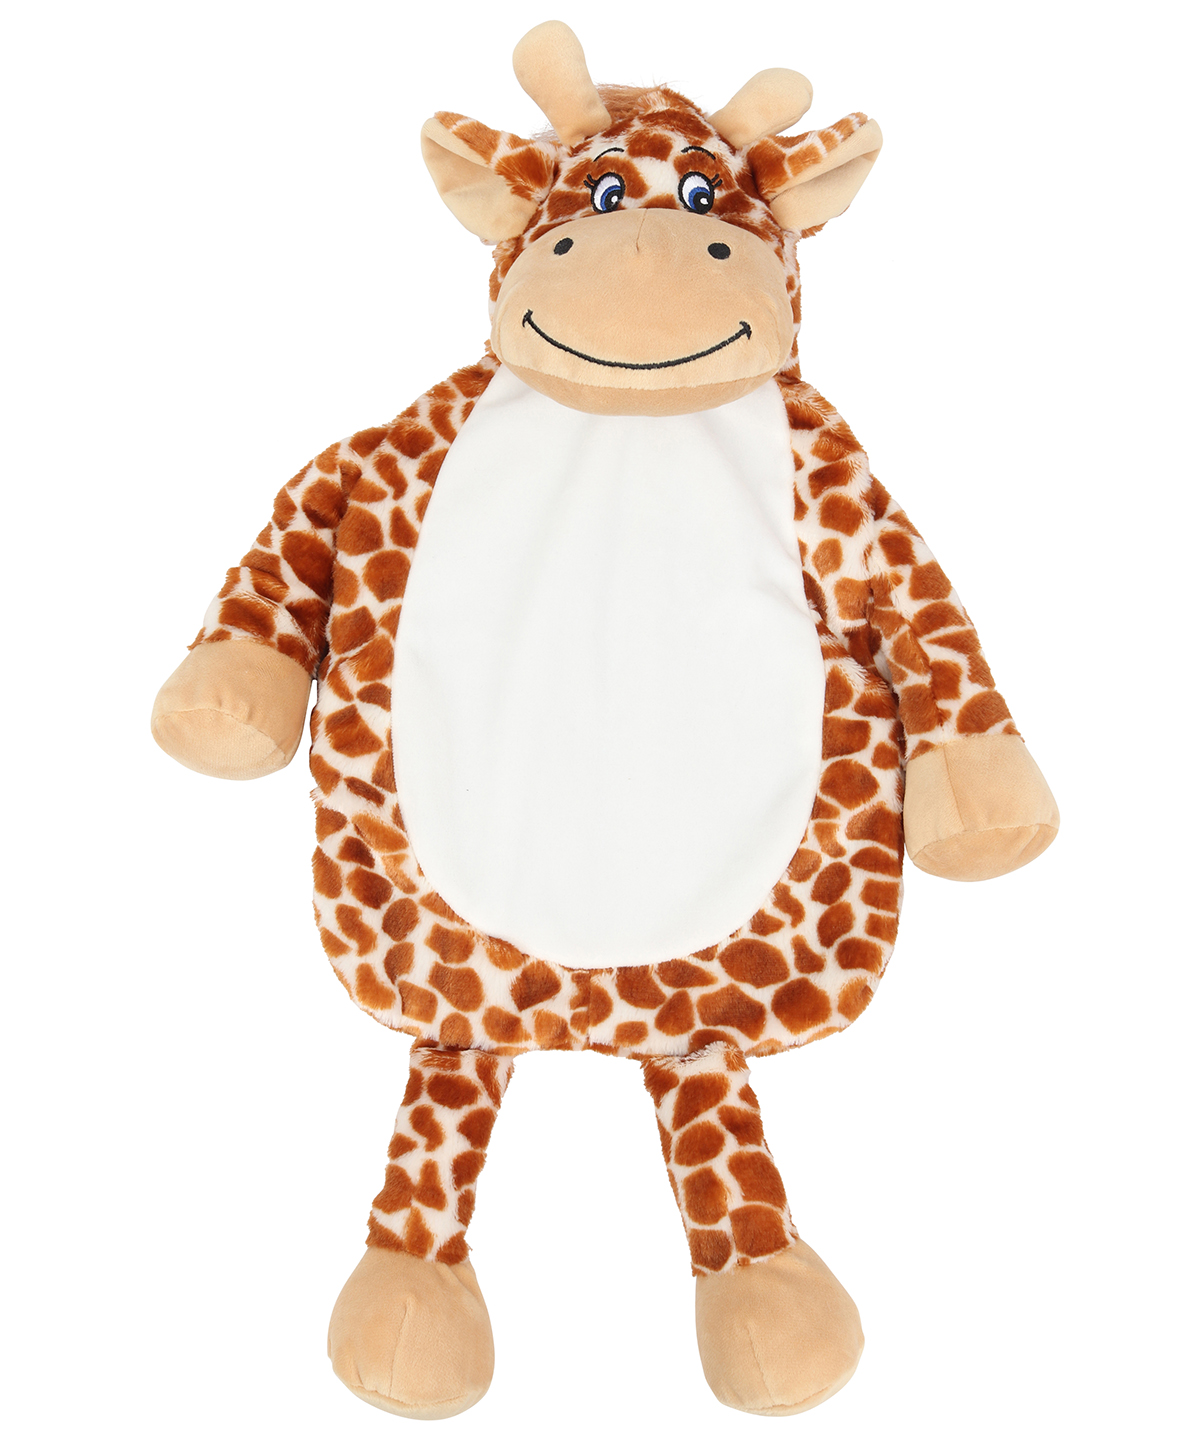 Giraffe 2 Litre Hot Water Bottle Cover Brown Size One Size